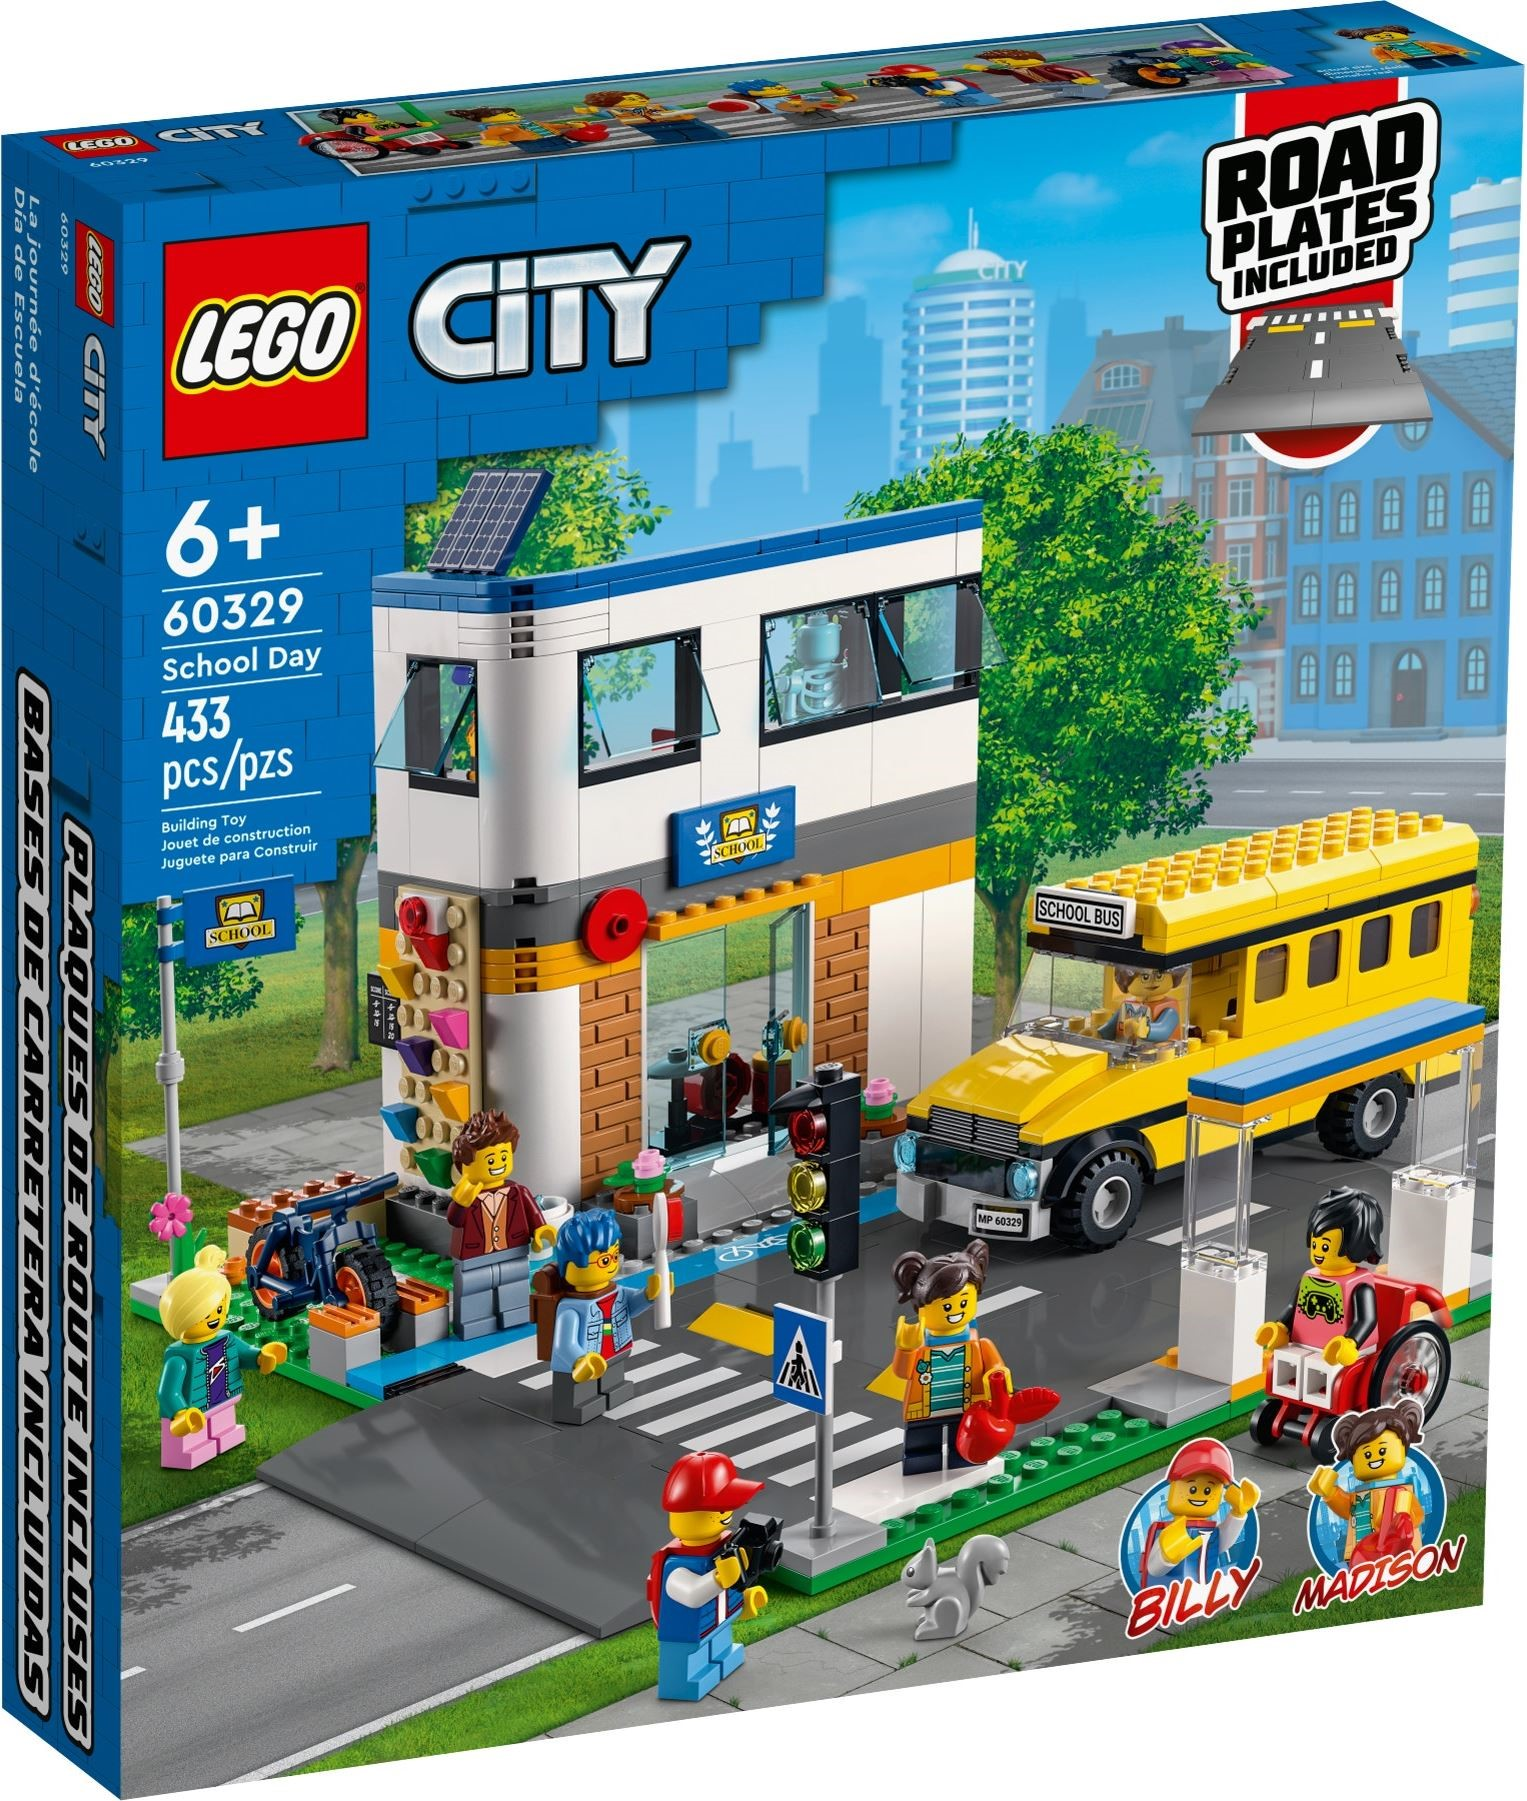 60315 Police Mobile Command Truck, Lego City Adventures Wiki